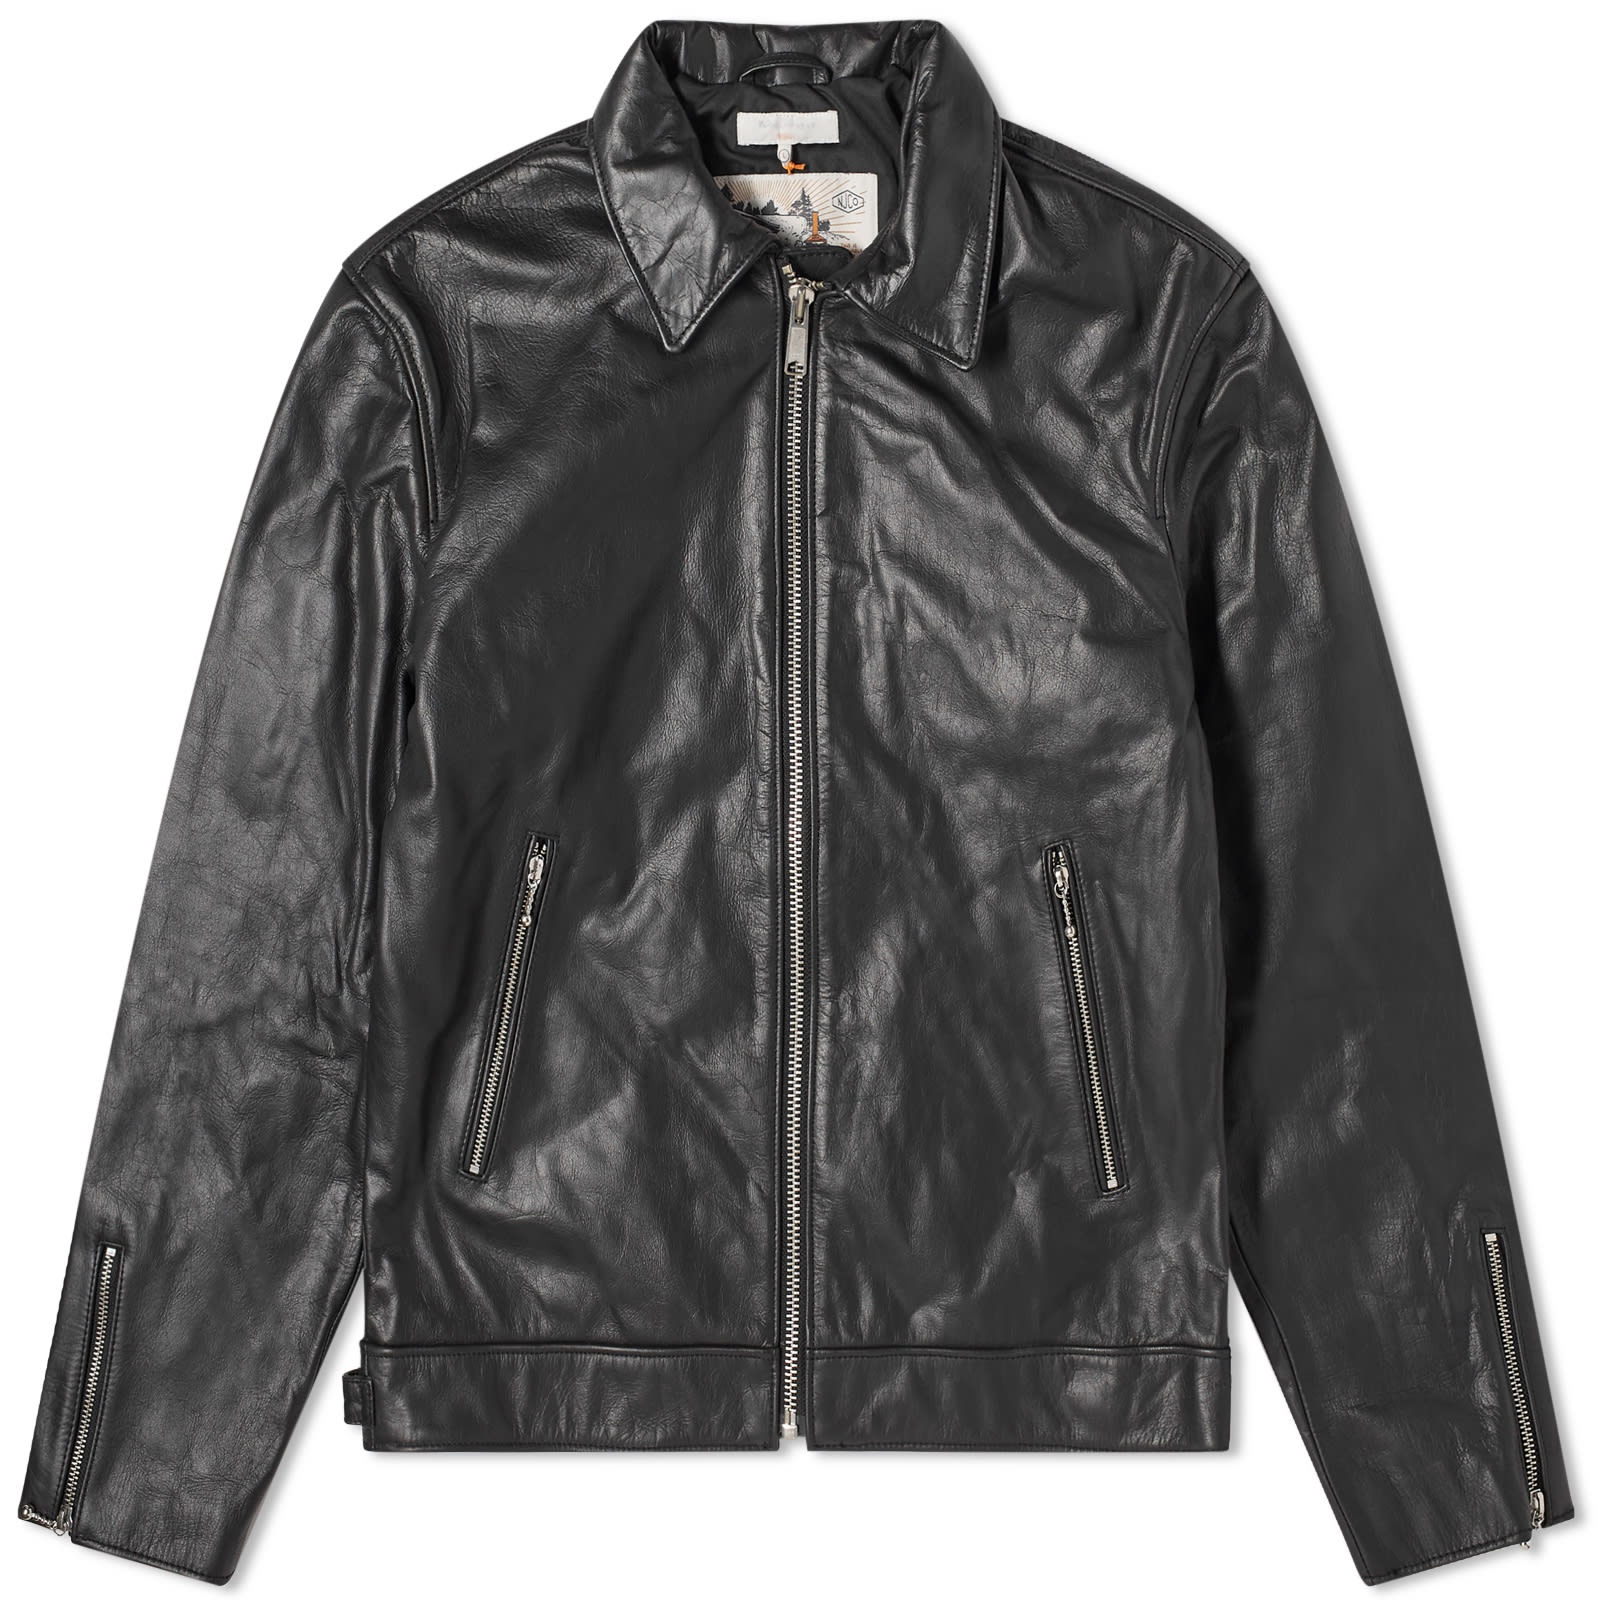 Nudie Jeans Co Eddy Rider Leather Jacket - 1